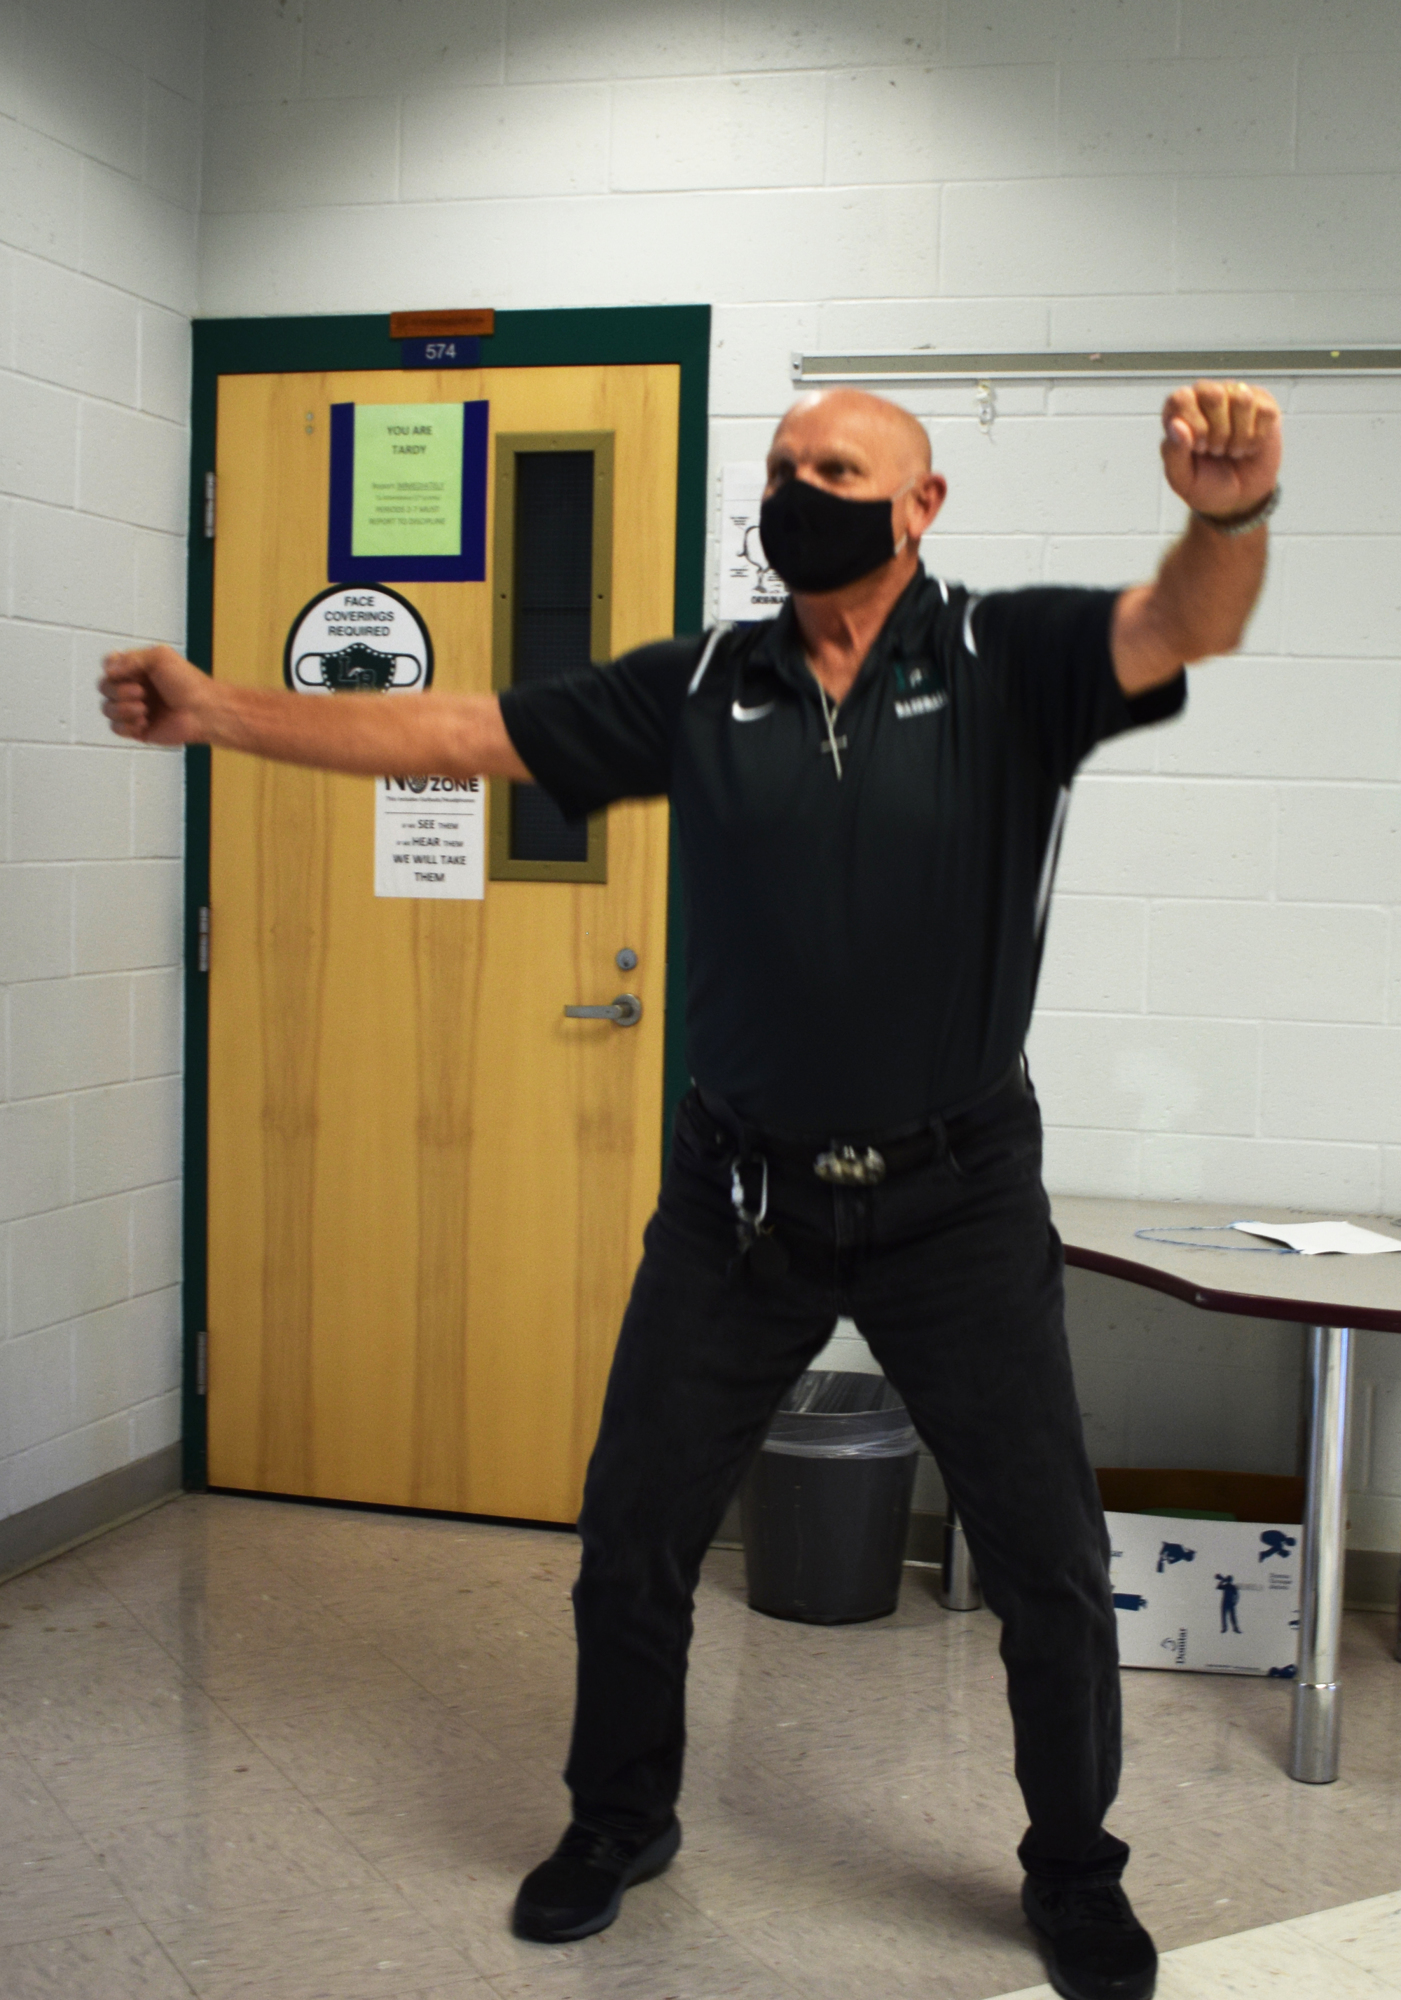 Faust DeLazzer, a science teacher at Lakewood Ranch High School, dances in the hallway between class periods to put a smile on students' faces.